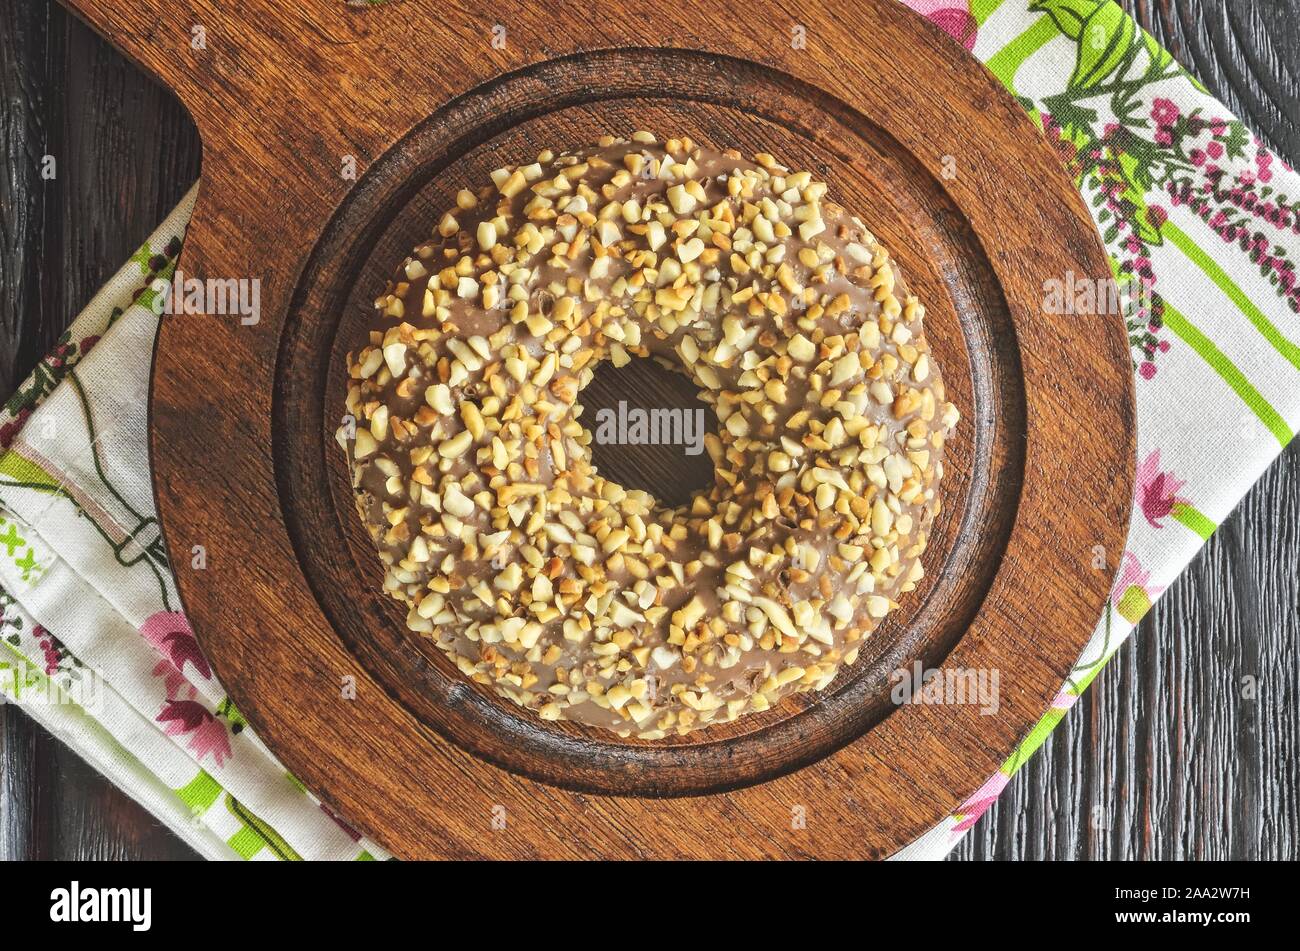 Delicious sweet snack served in a vintage style. Donut with a hole in chocolate topping with peanuts on dark wood. Stock Photo